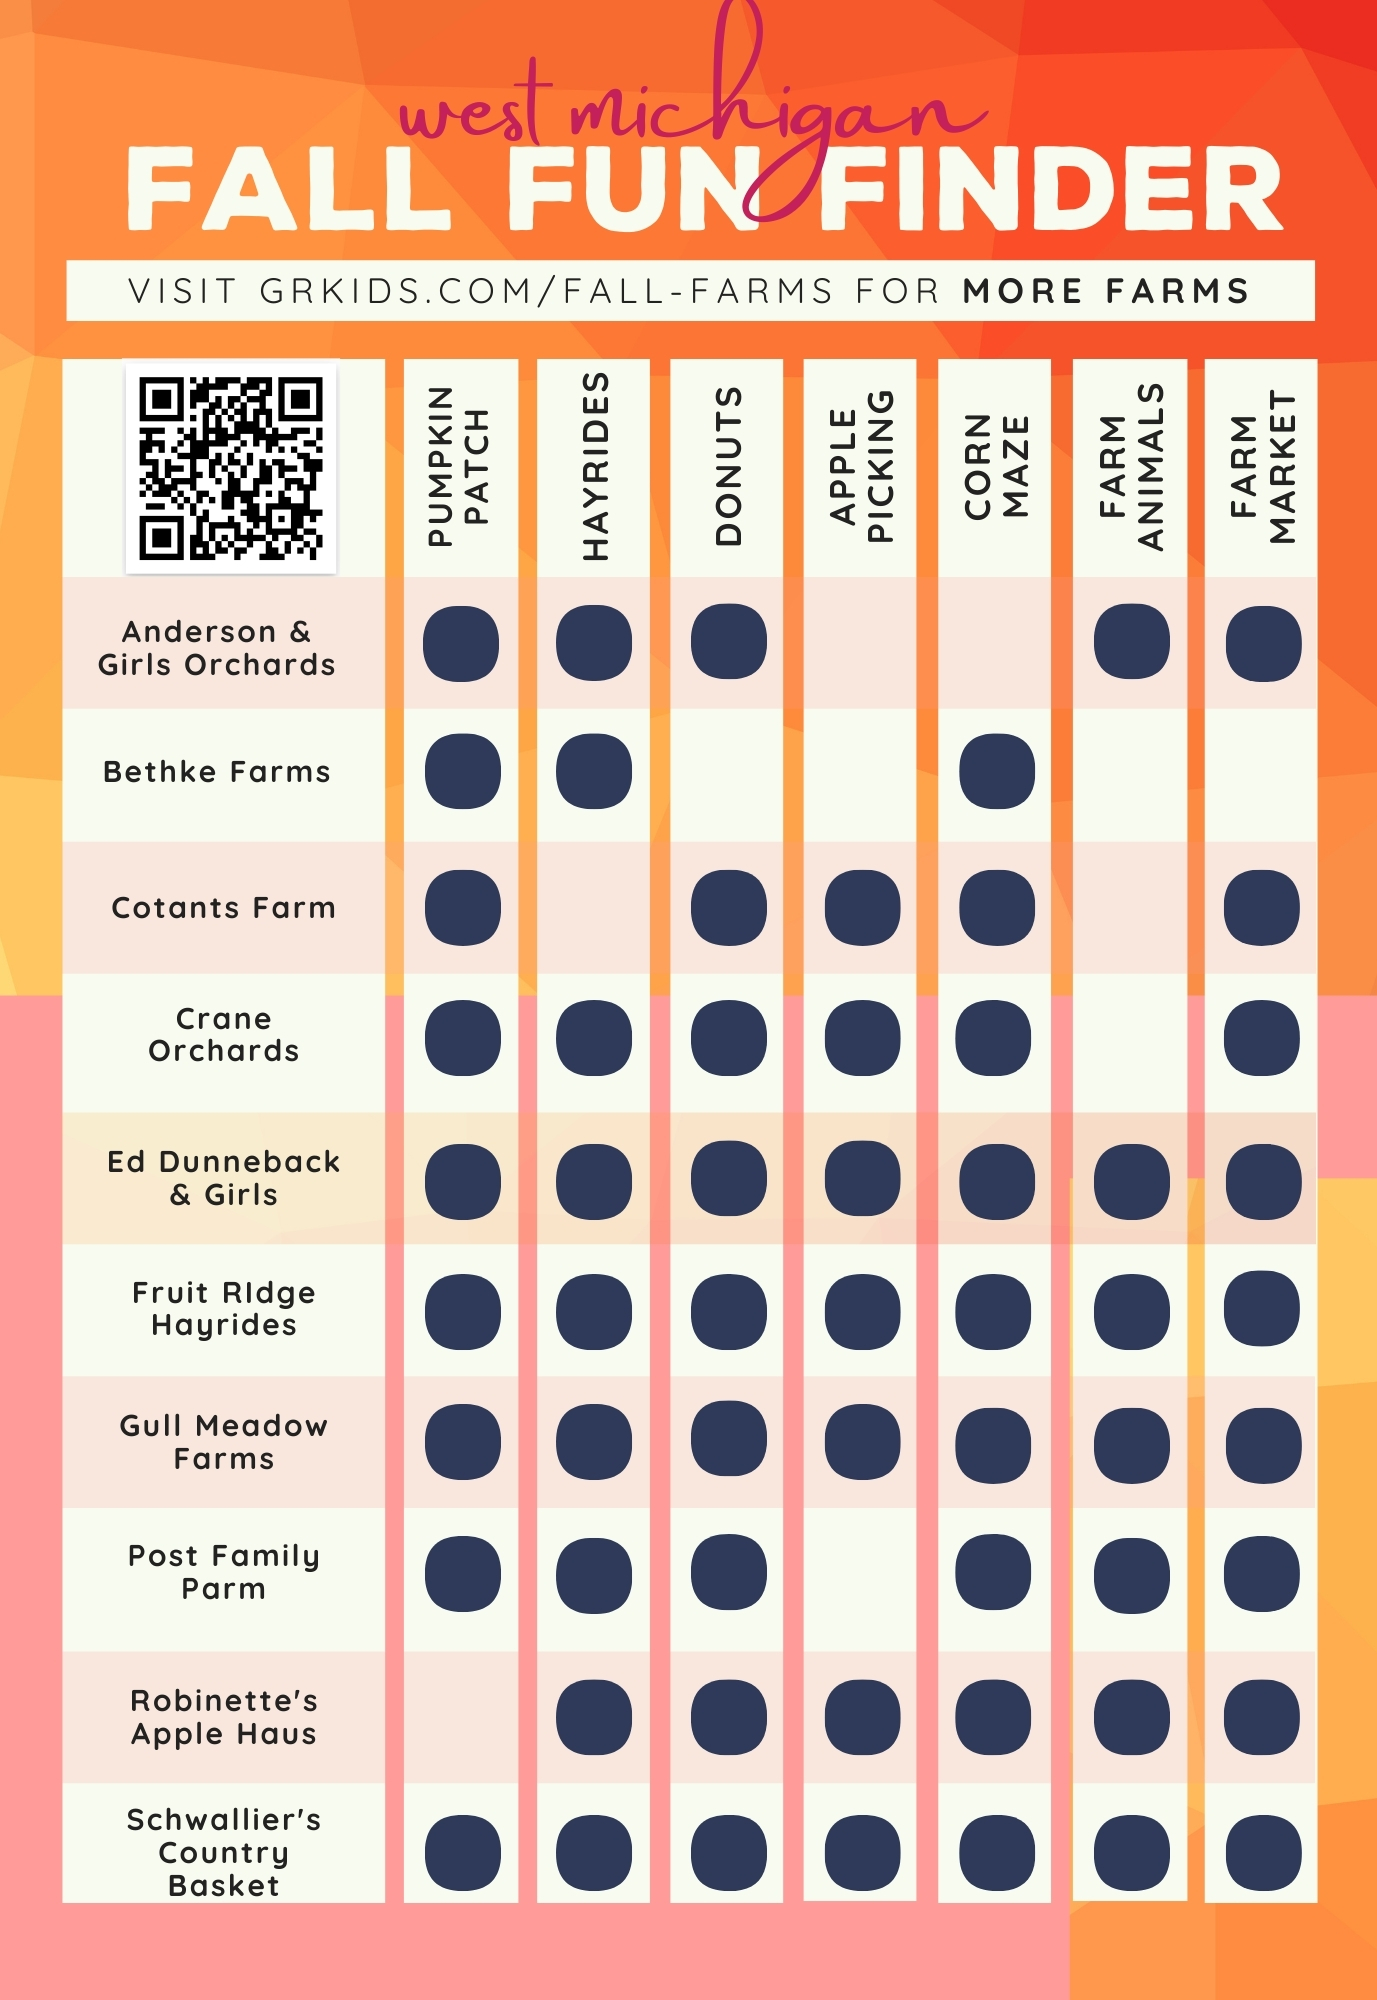 grand rapids fall fun finder grid with QR code